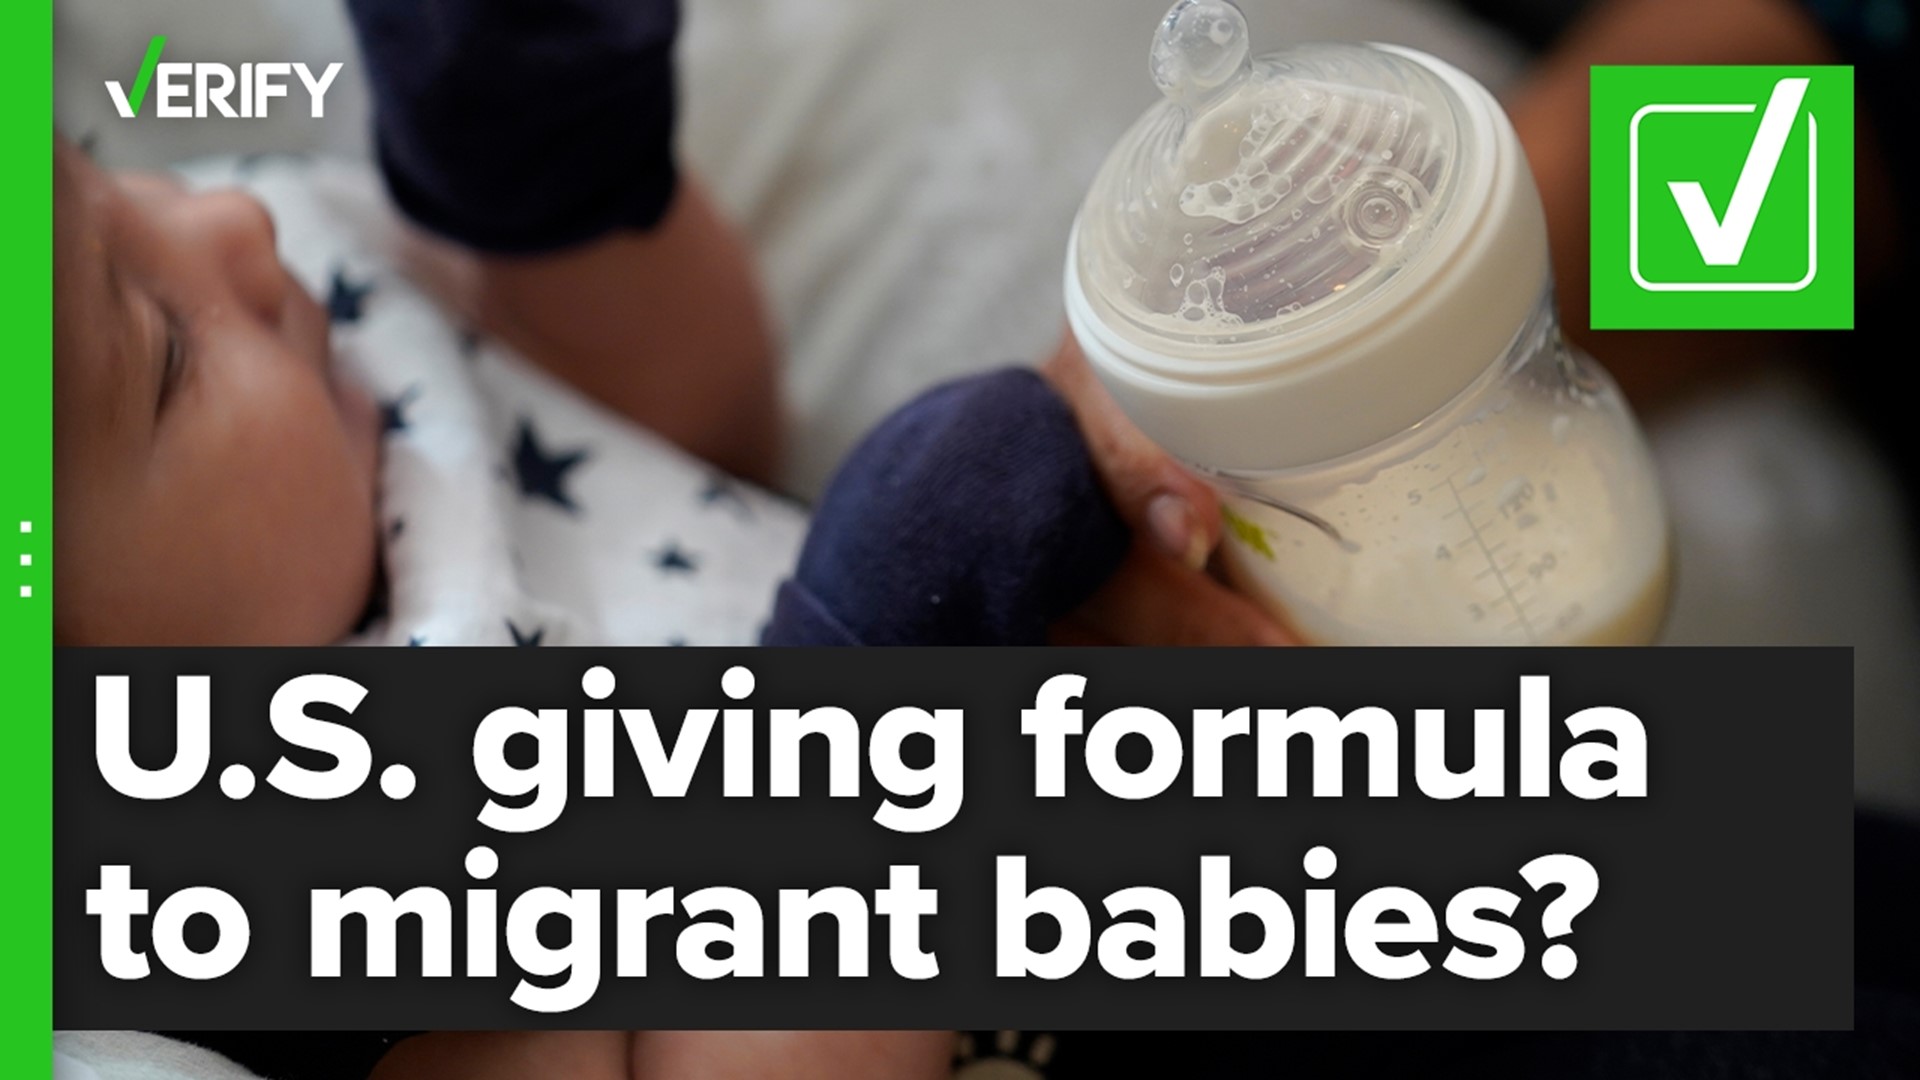 Is the U.S. government providing formula to migrant babies at the border? The VERIFY team confirms this is true.